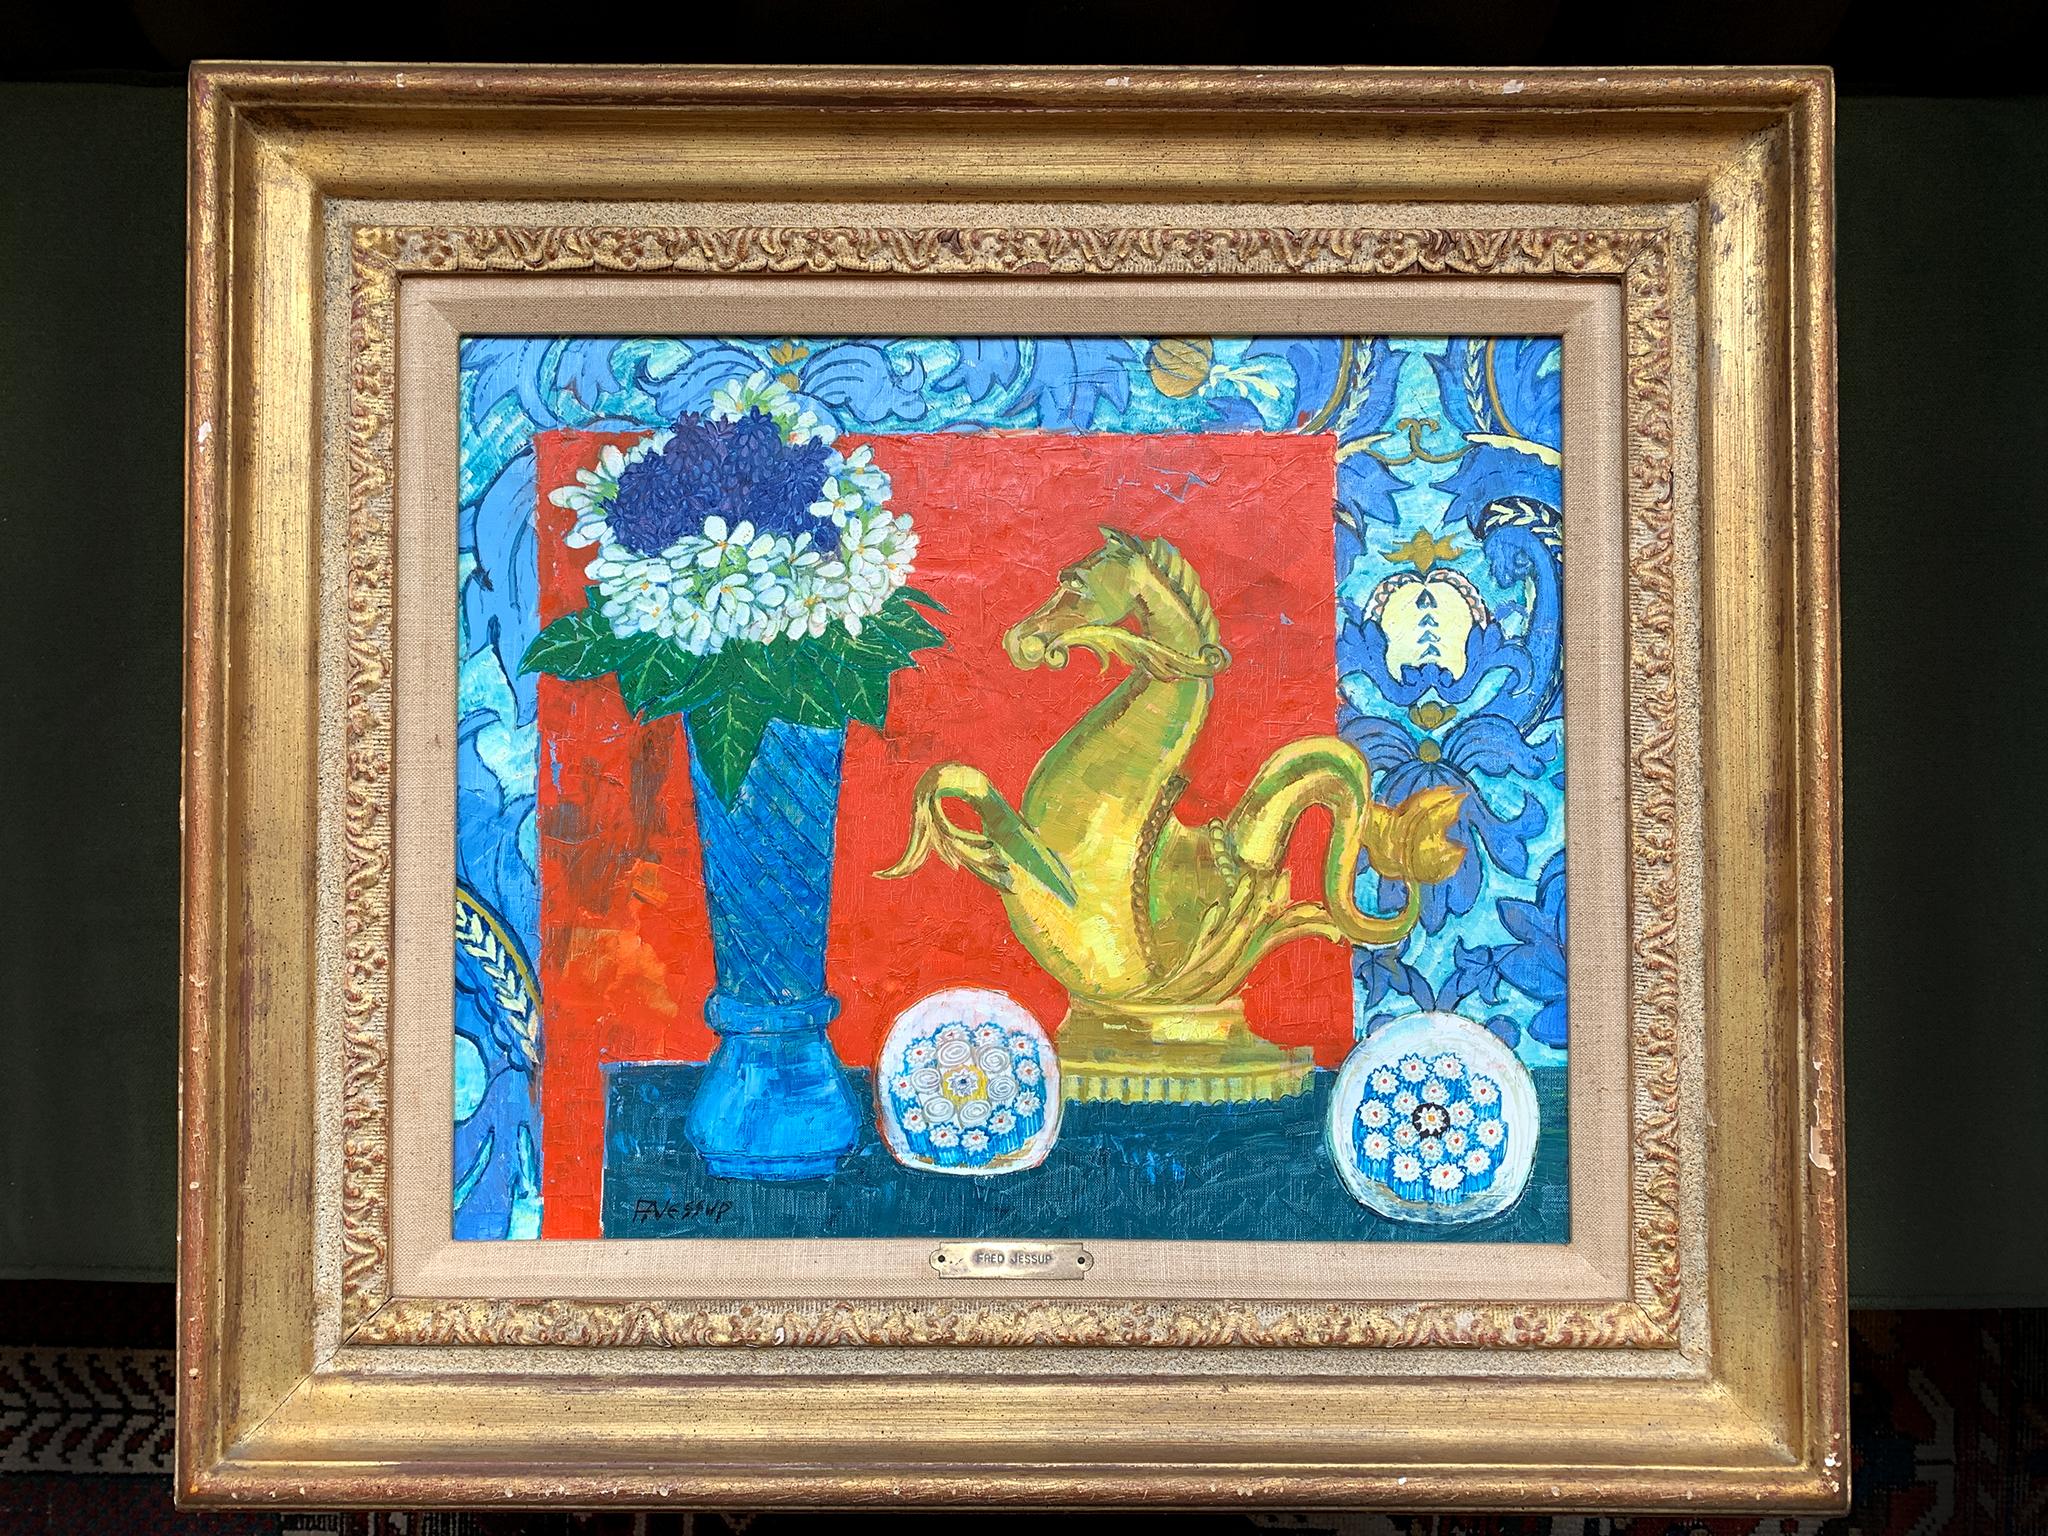 By the Australian artist Frederick Arthur Jessup (1920-2007) - a painter of vivid still-life and interior scenes that are rich with pattern and bold color. This oil-on-canvas painting is framed in an ornate giltwood frame. Signed on the lower left.